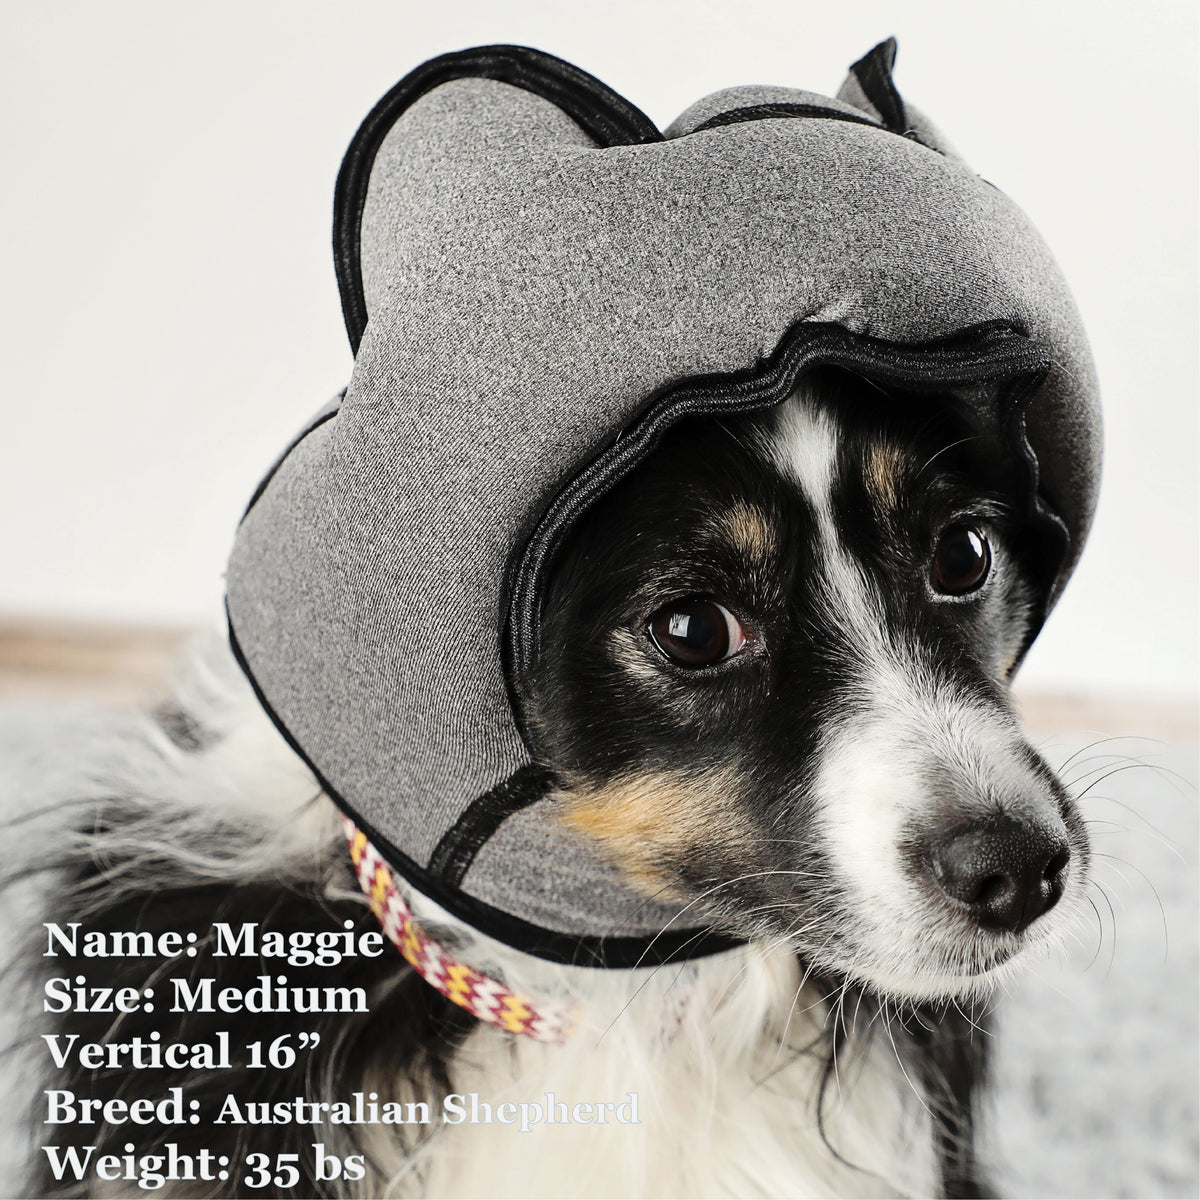 Maggie is a Shepherd in a Medium Grey PAWNIX Noise Cancelling Headset for dogs